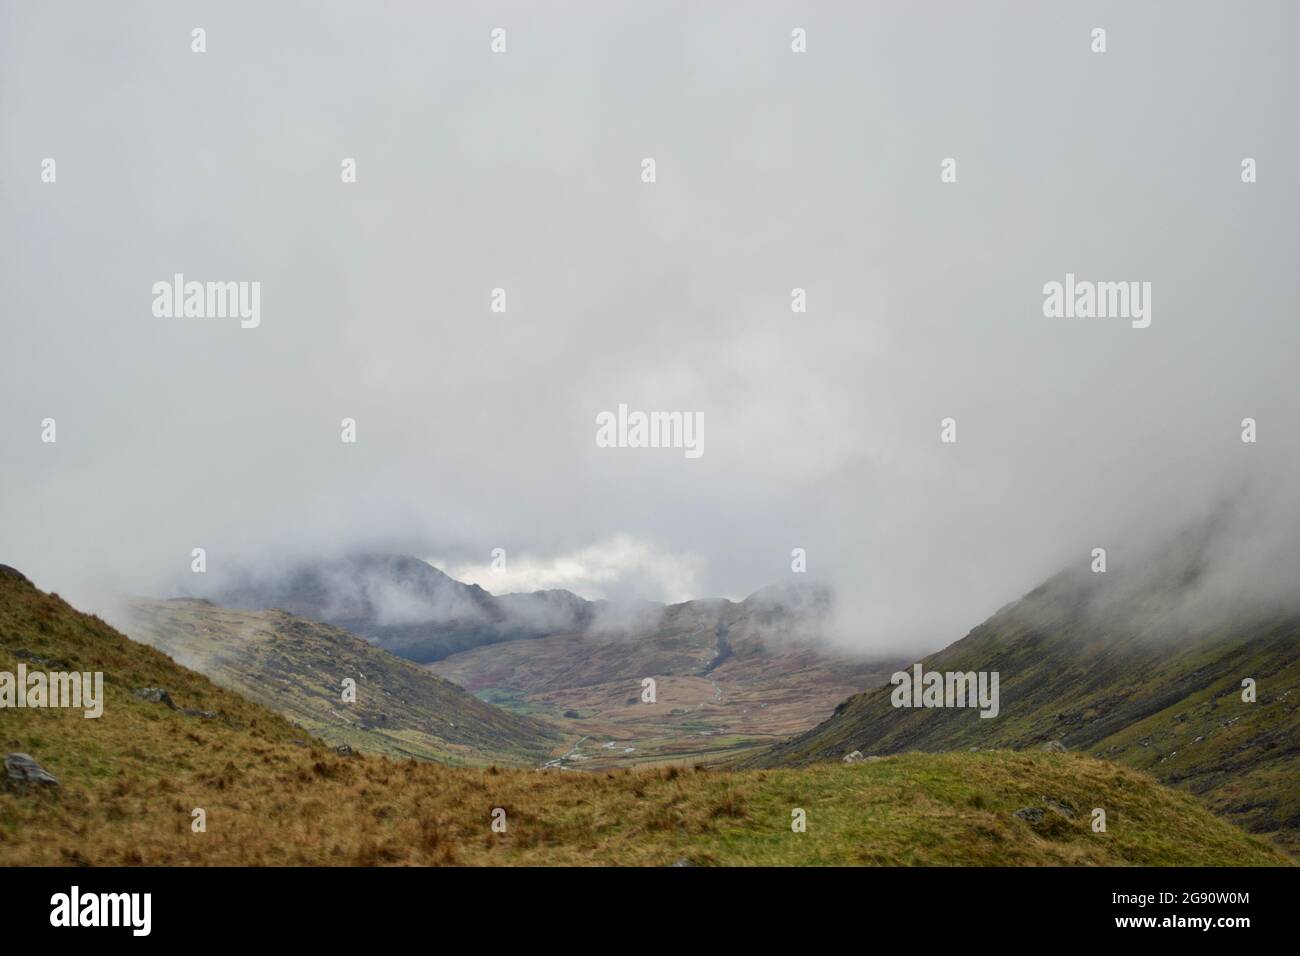 A misty mountain valley: clouds hanging low around mountain peaks; grass in foreground; a valley with a road snaking down - bends in the route across Stock Photo